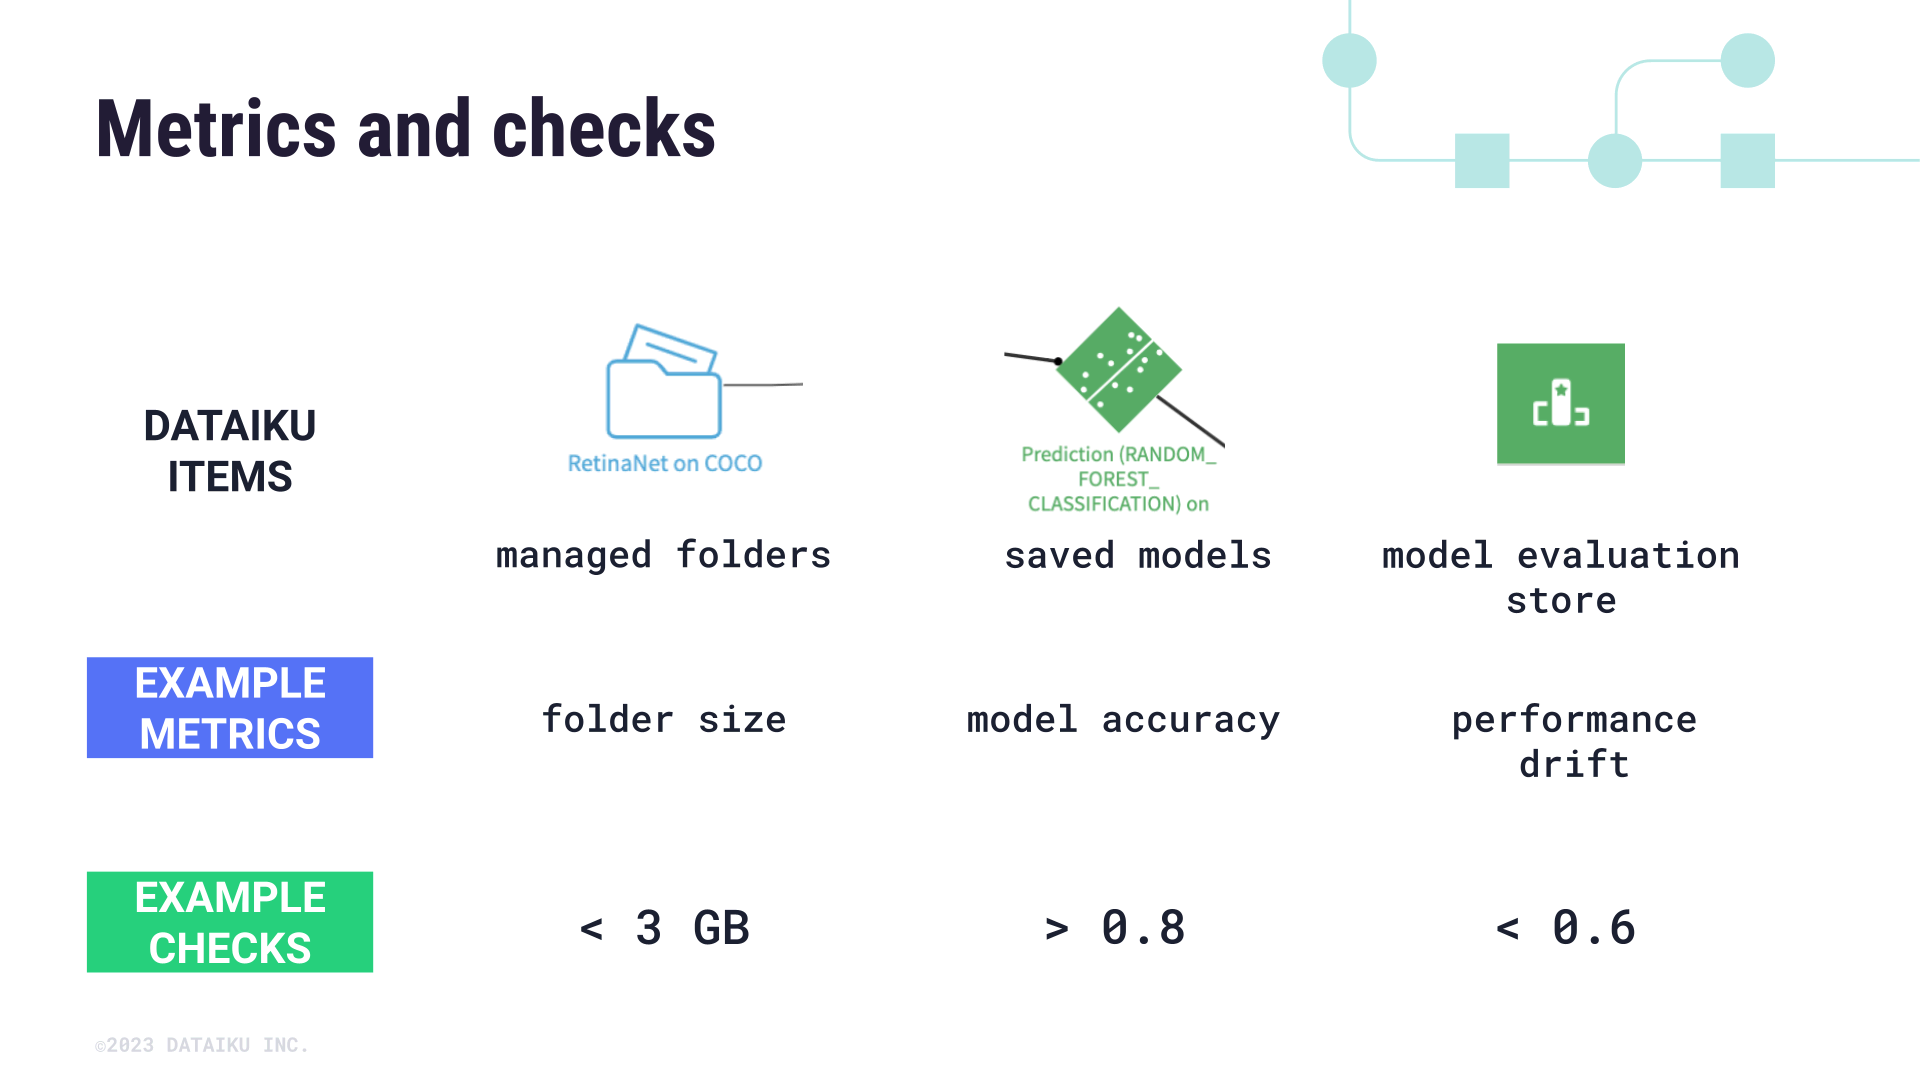 Examples of metrics and checks used on managed folders, saved models, or model evaluation stores.